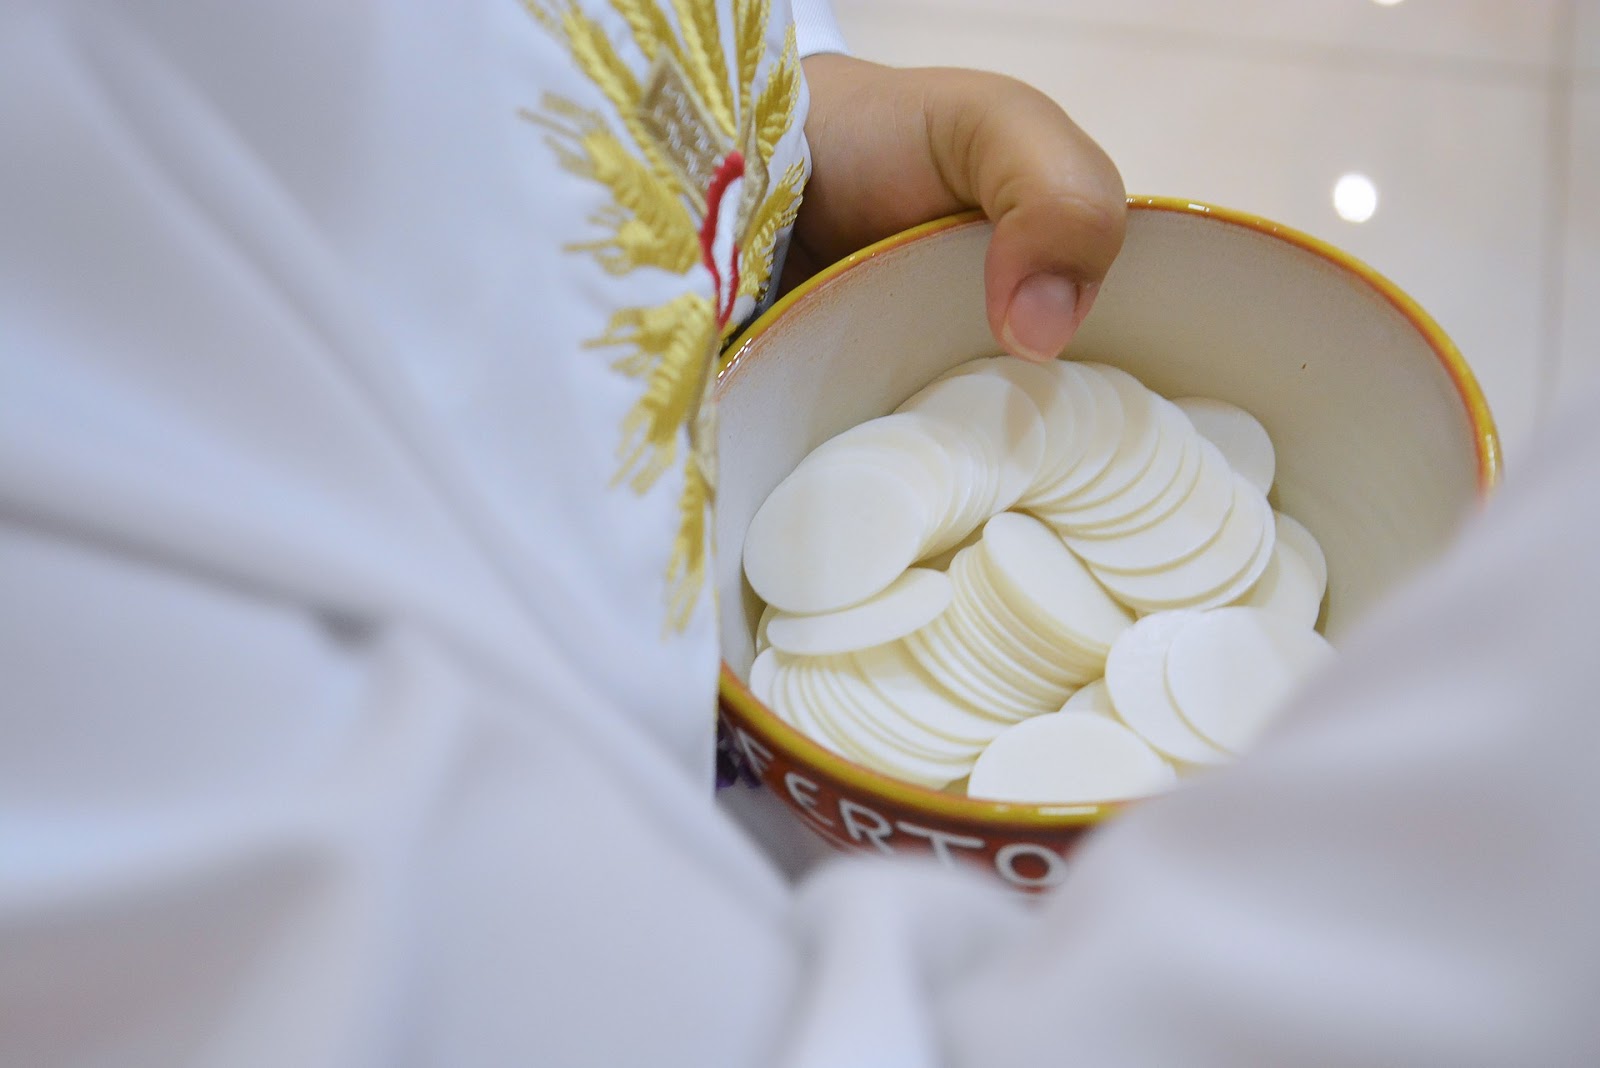 A robed person holds communion wafers